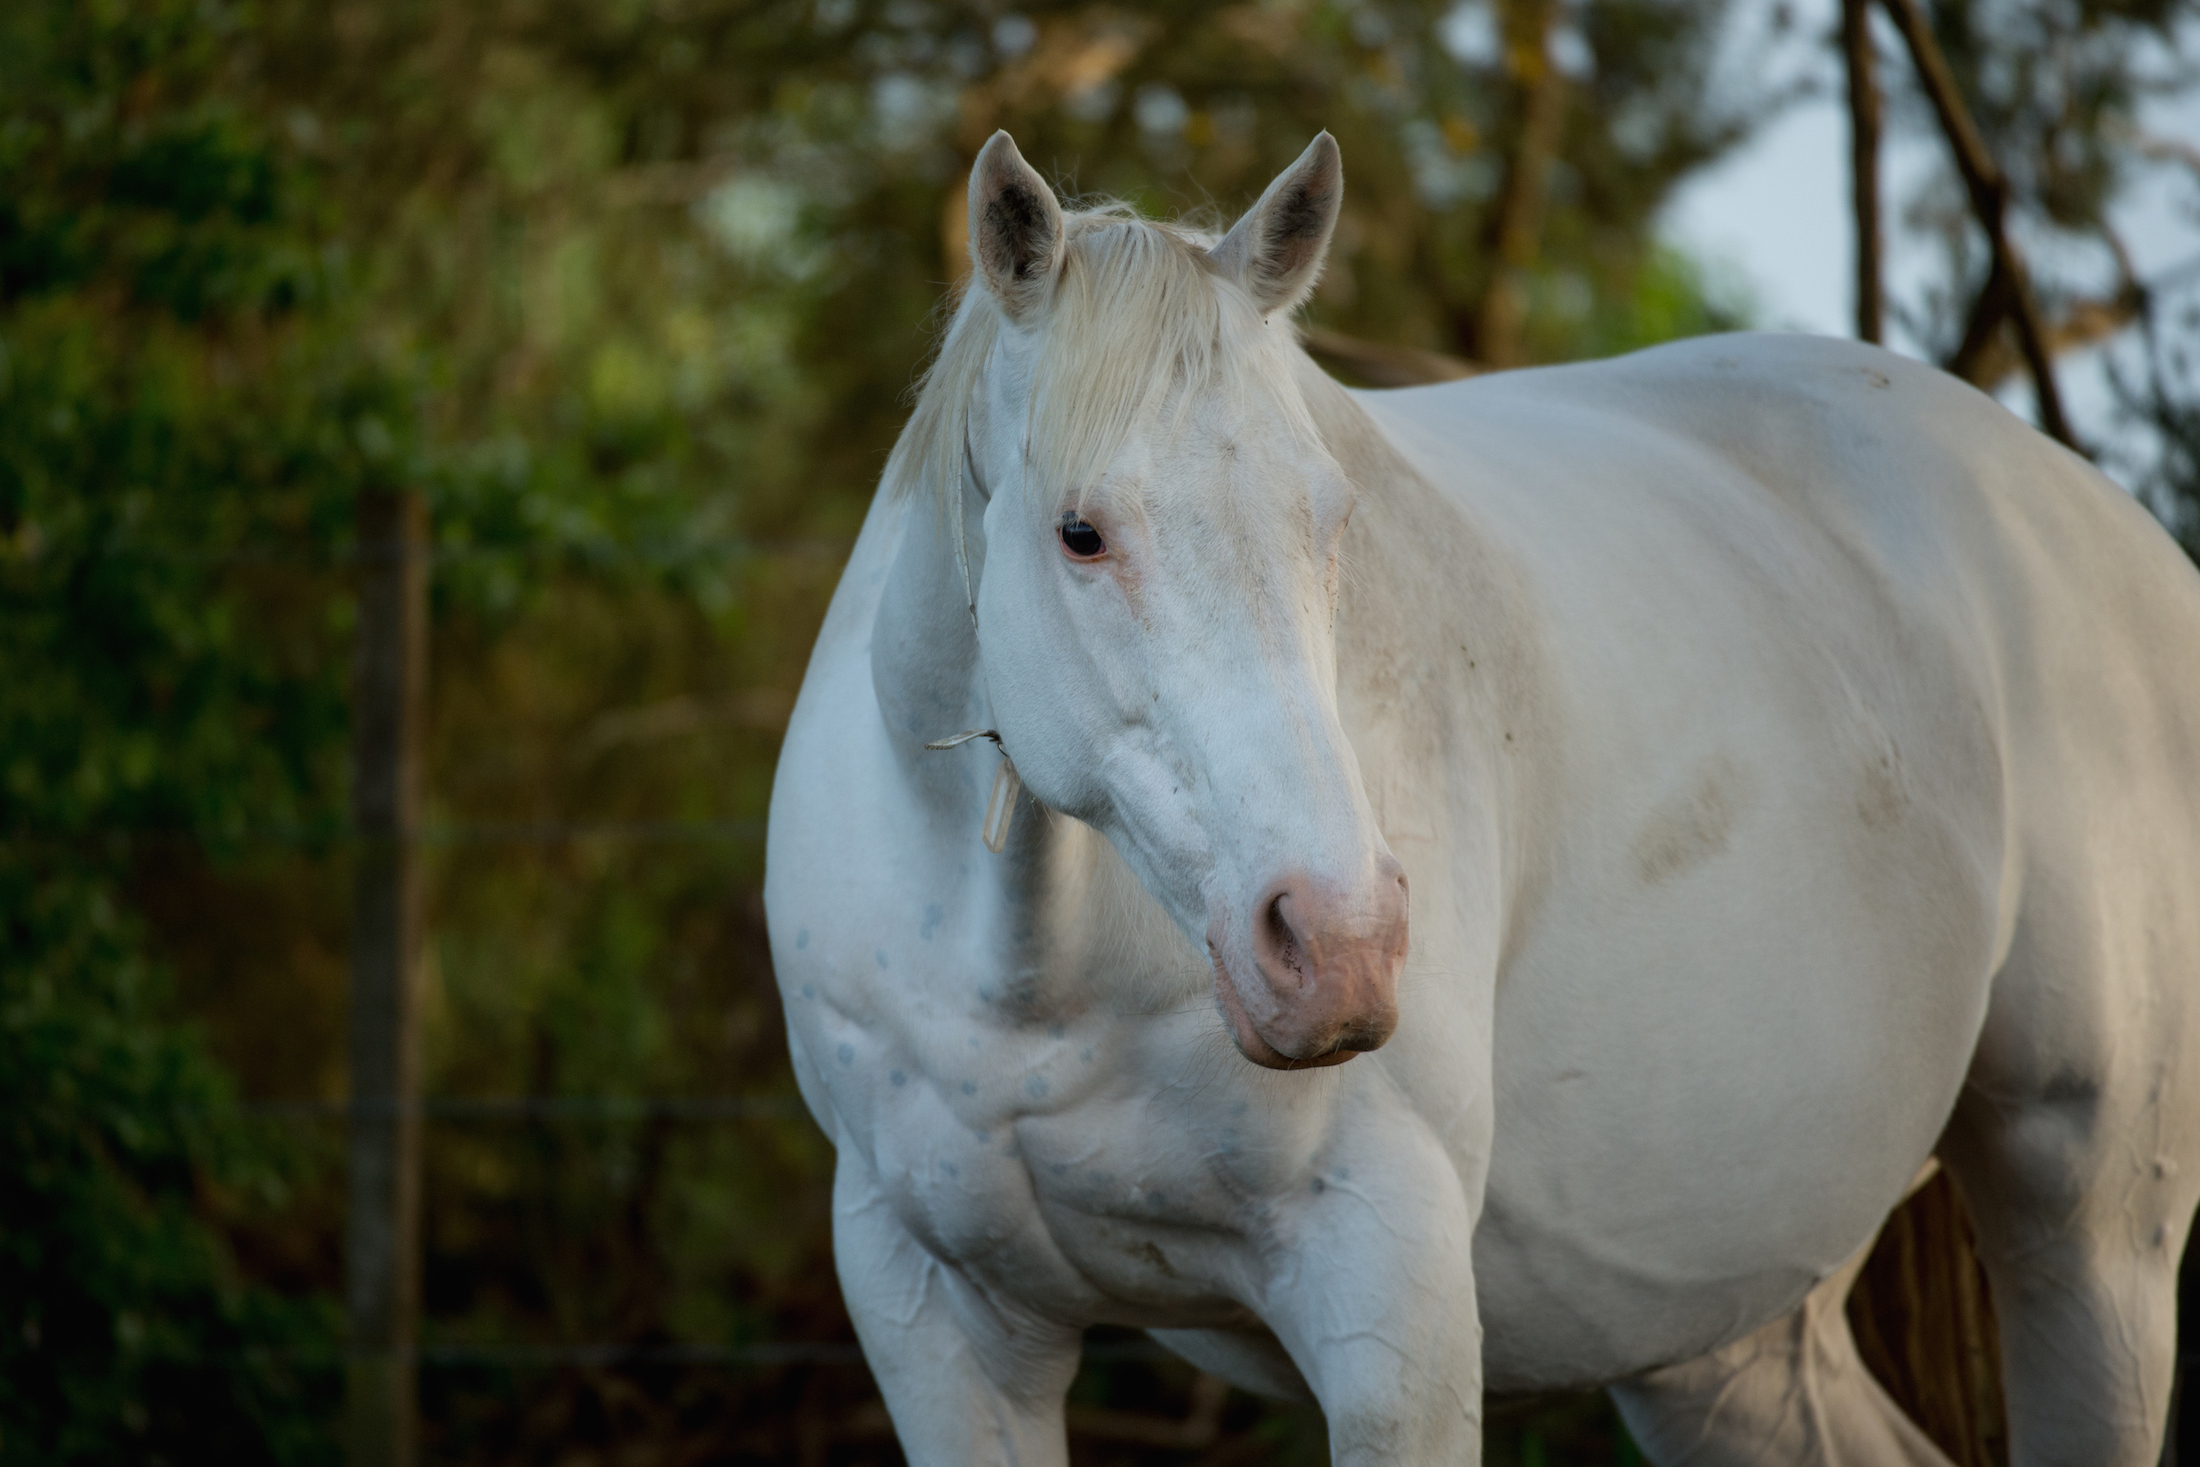 The Opera House, the mare who started it all, pictured at Windsor Park Stud in New Zealand. Photo: Sharon Lee Chapman